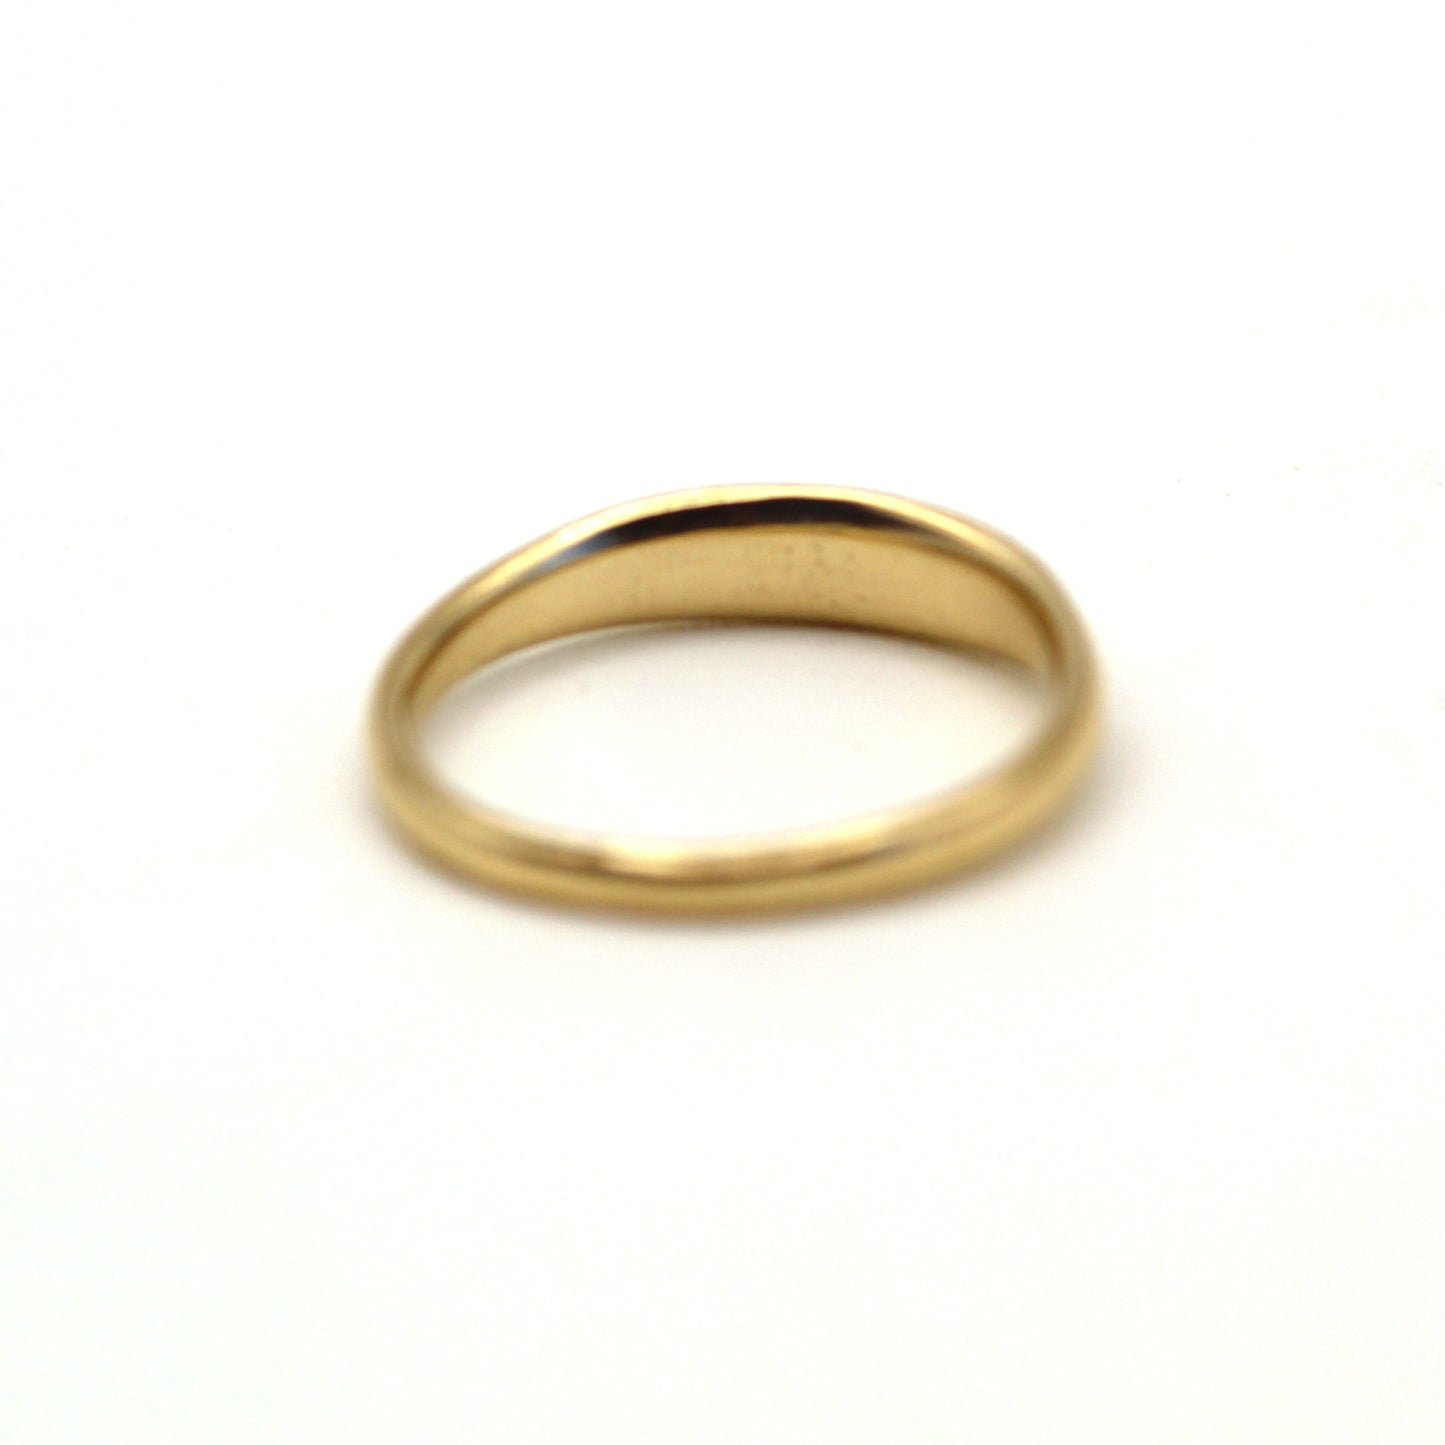 14k Comfortable Gold Ring Handcrafted